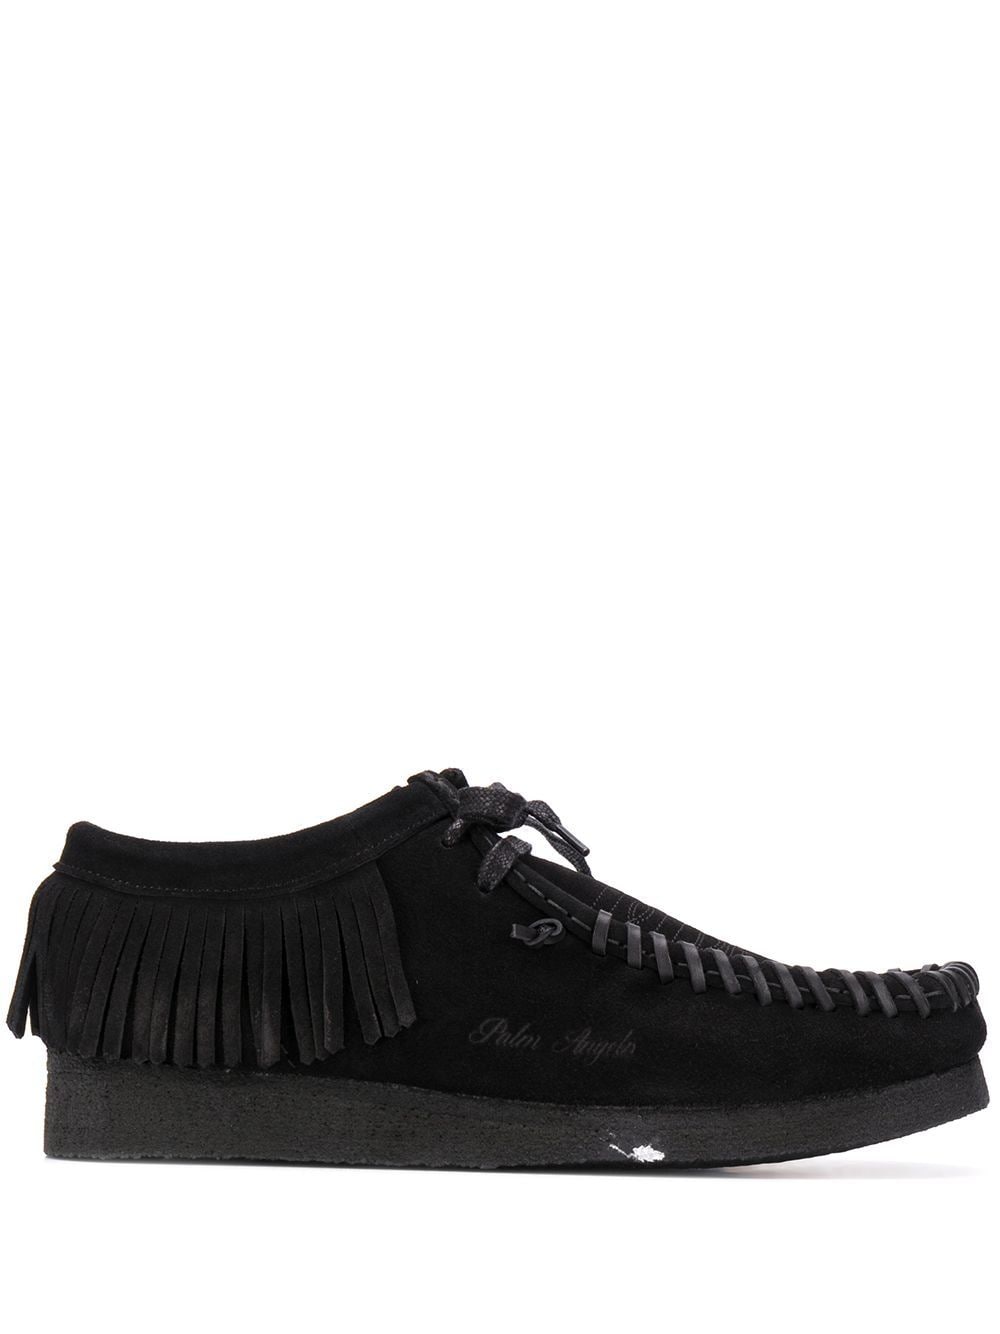 Palm Angels fringed lace-up shoes - Black von Palm Angels